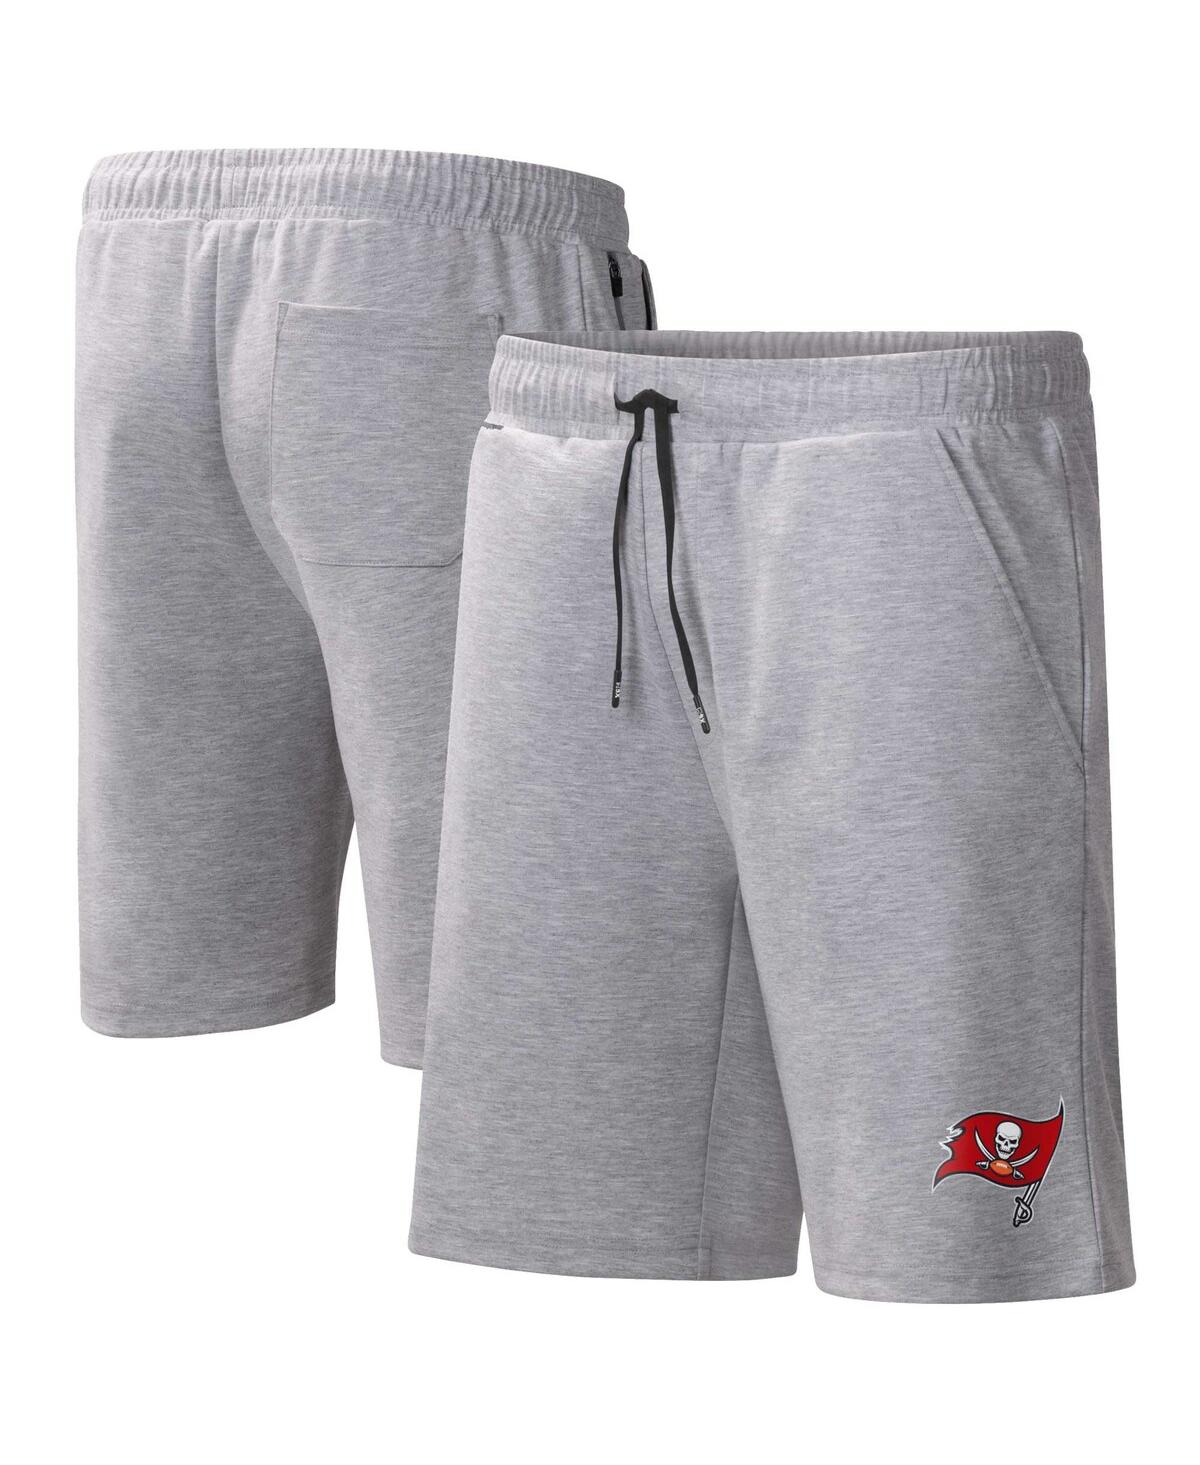 Men's Msx by Michael Strahan Heather Gray Tampa Bay Buccaneers Trainer Shorts - Heather Gray